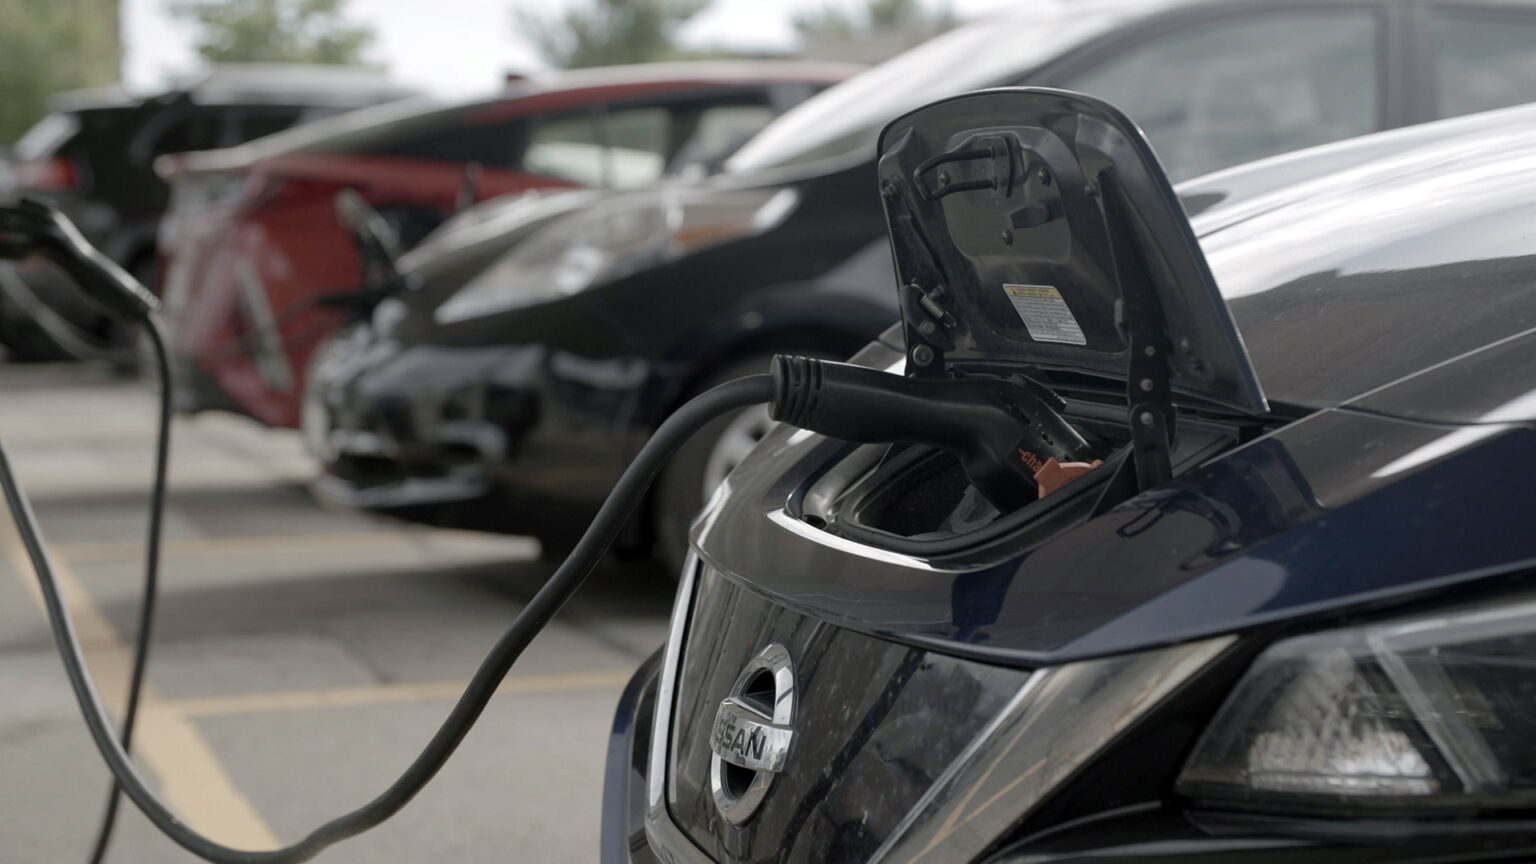 A charging system is plugged into the front of an electric vehicle, with more electric vehicles charging in the background.